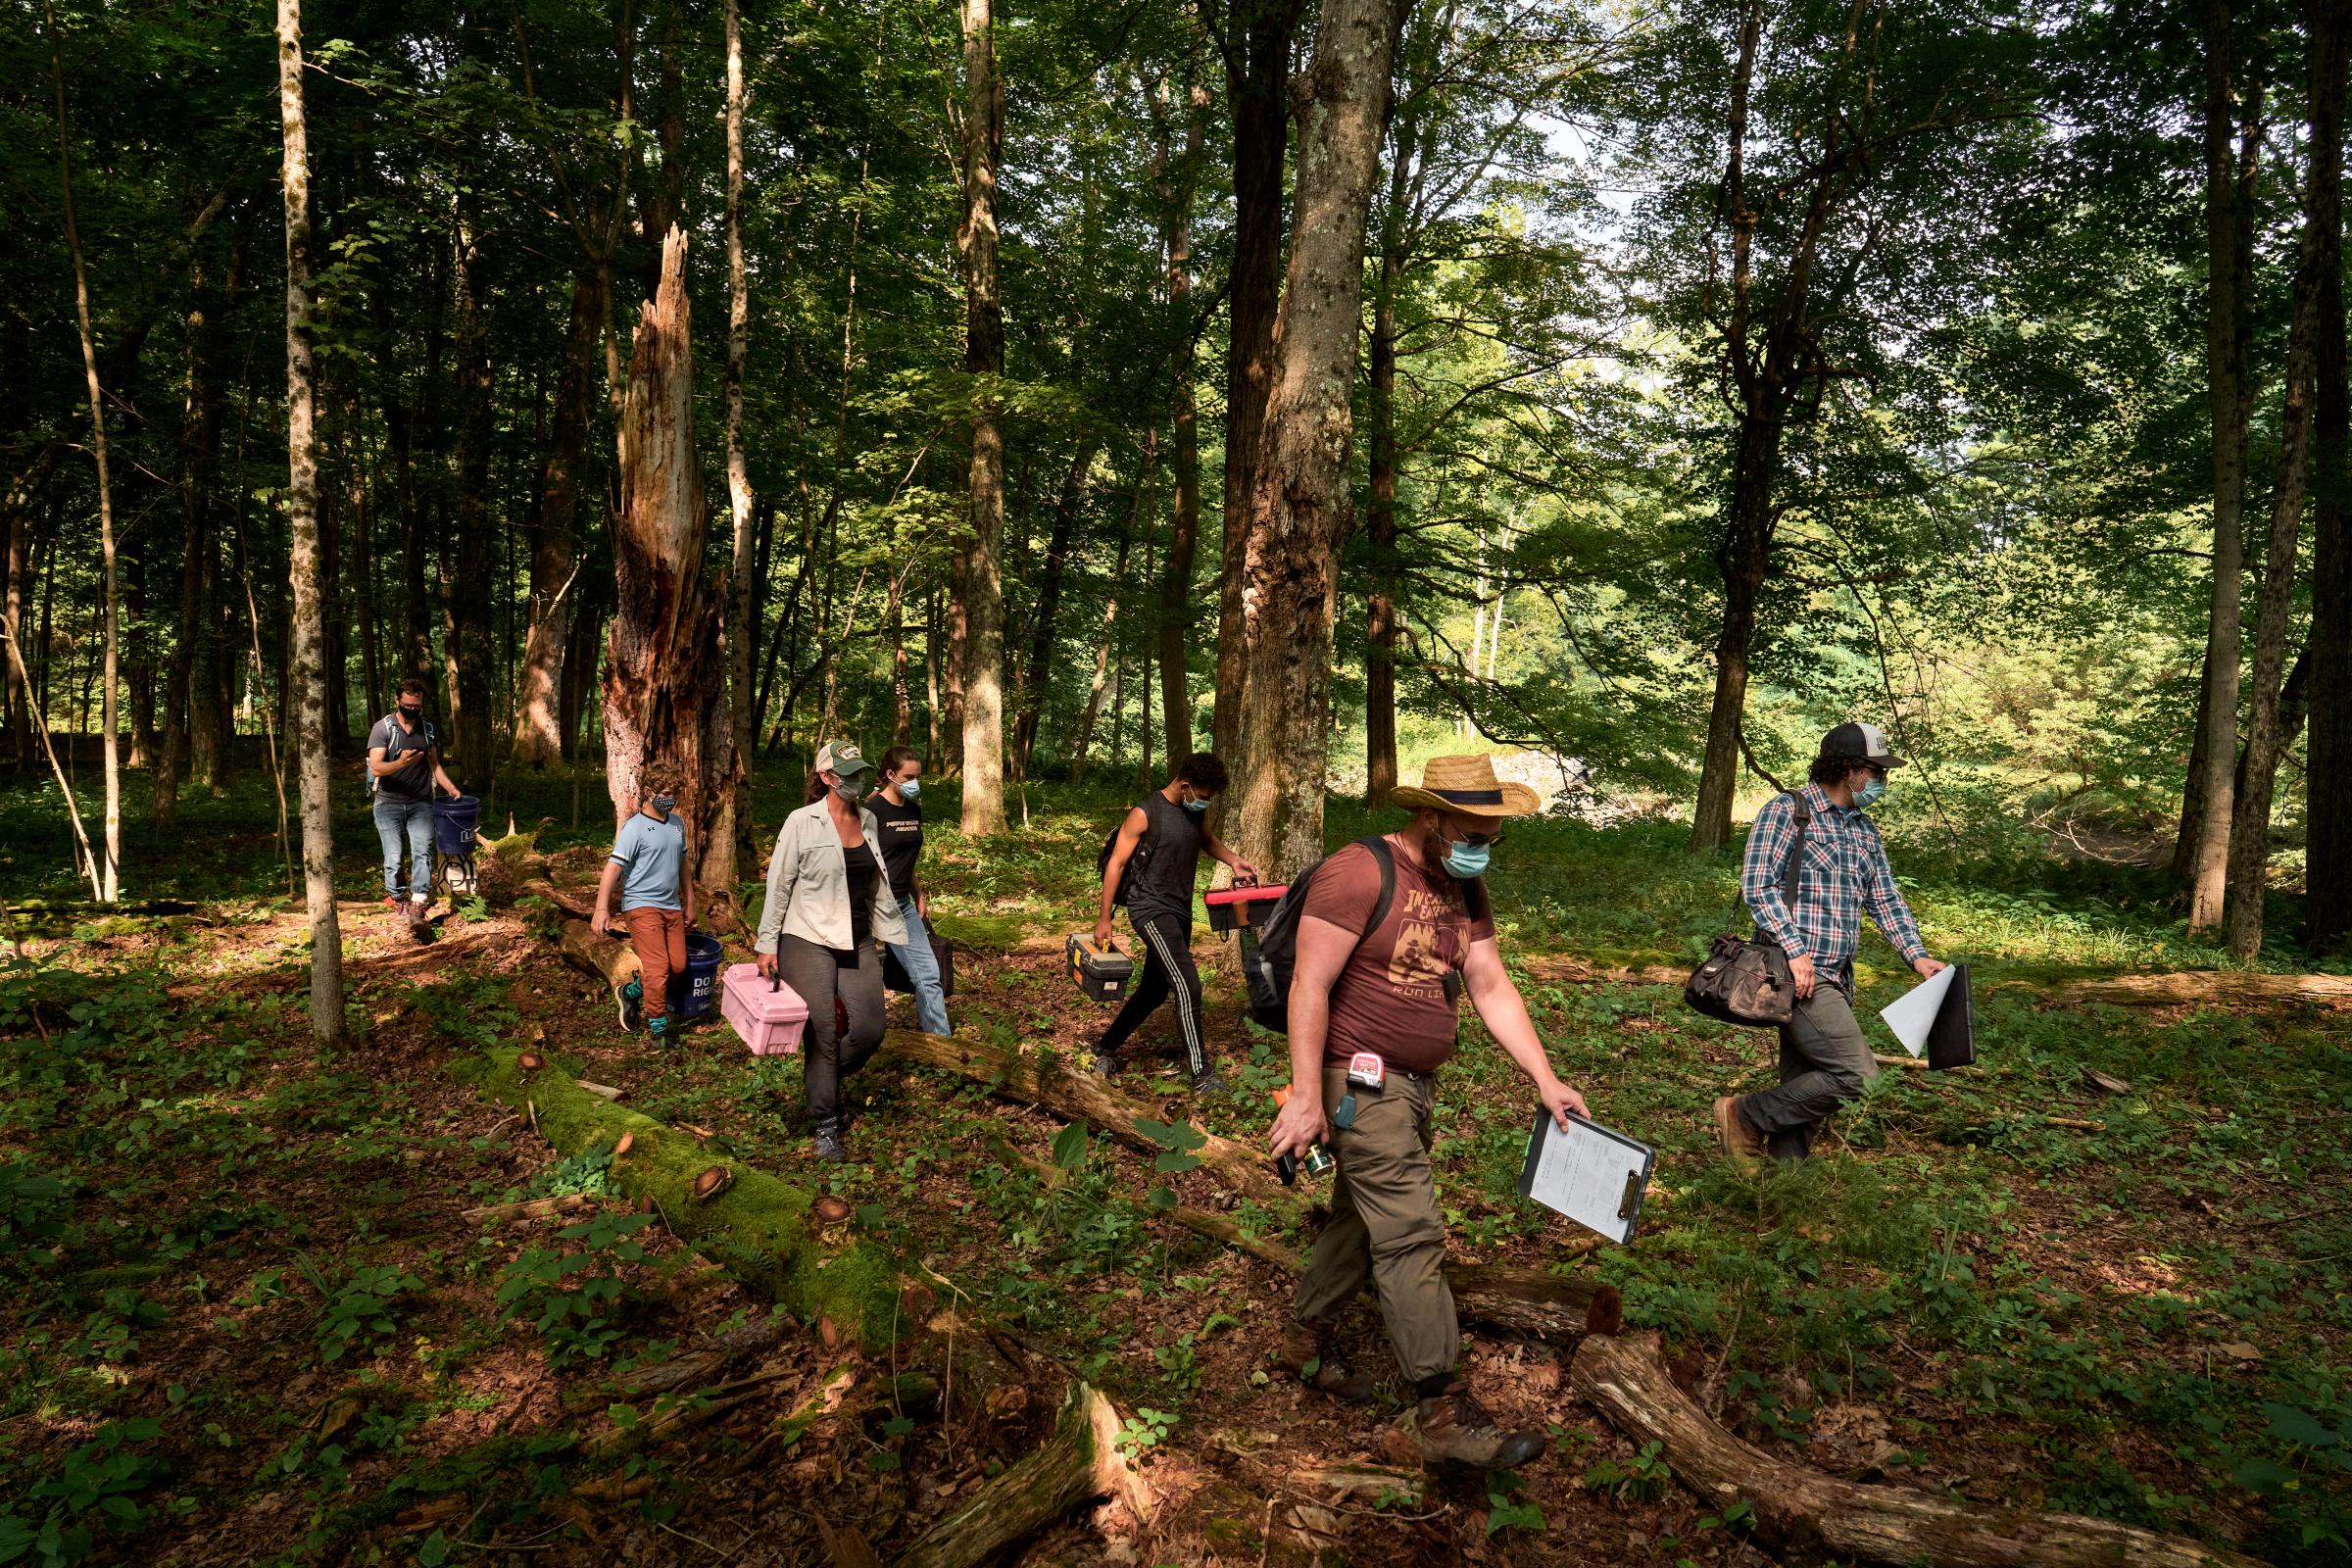 The Berkshires are Mohican - An archeological dig by the Stockbridge-Munsee tribe, Williams College, and the City of...